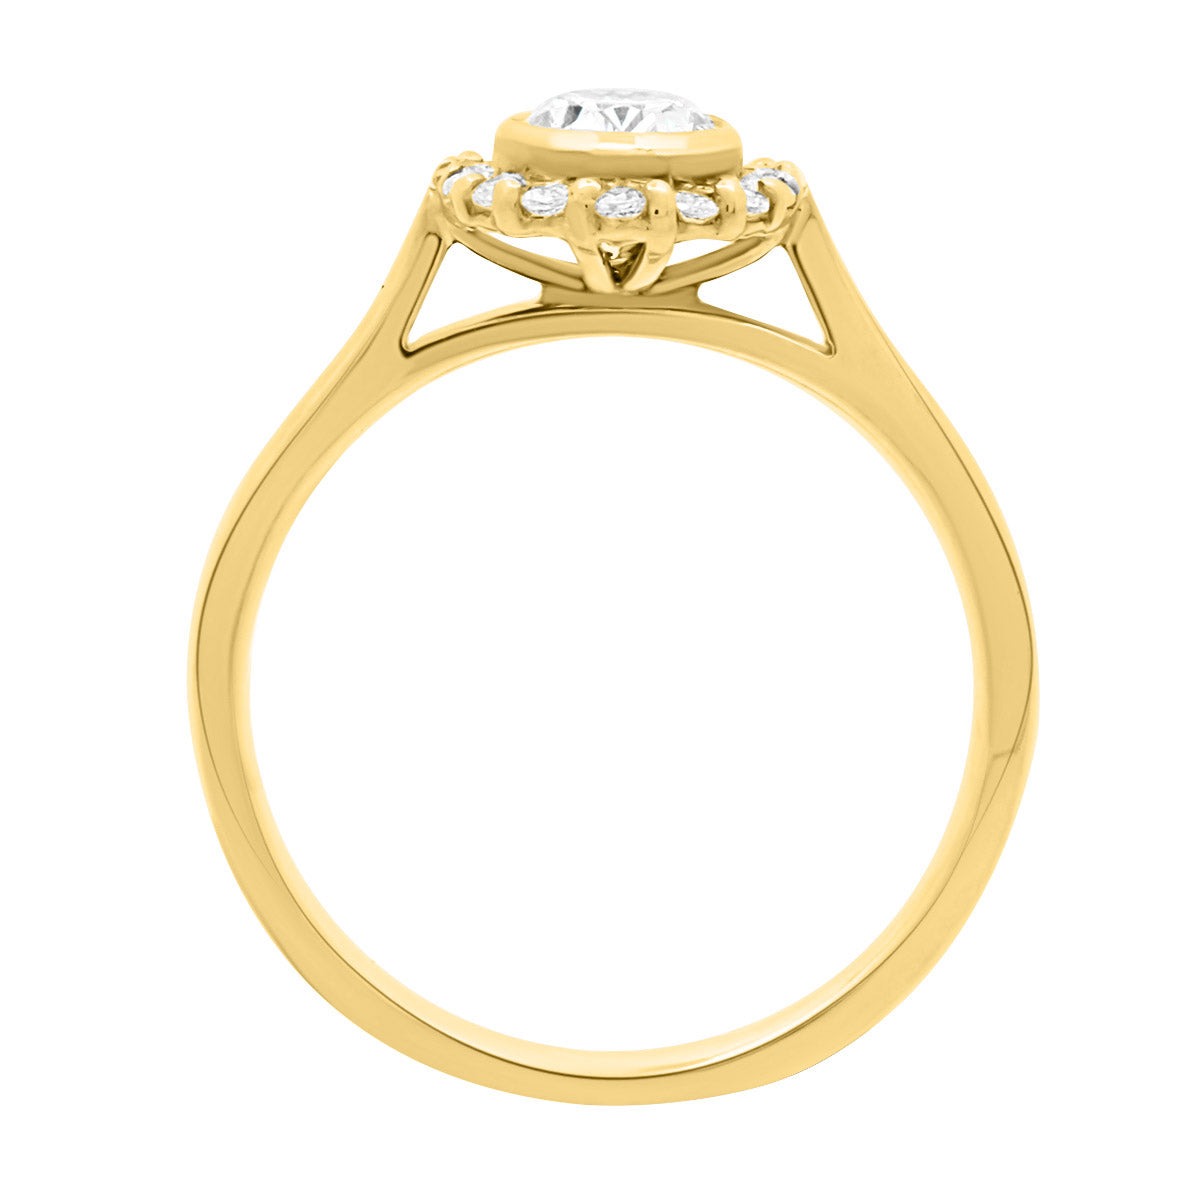  Oval Halo Diamond Ring in yellow gold standing upright